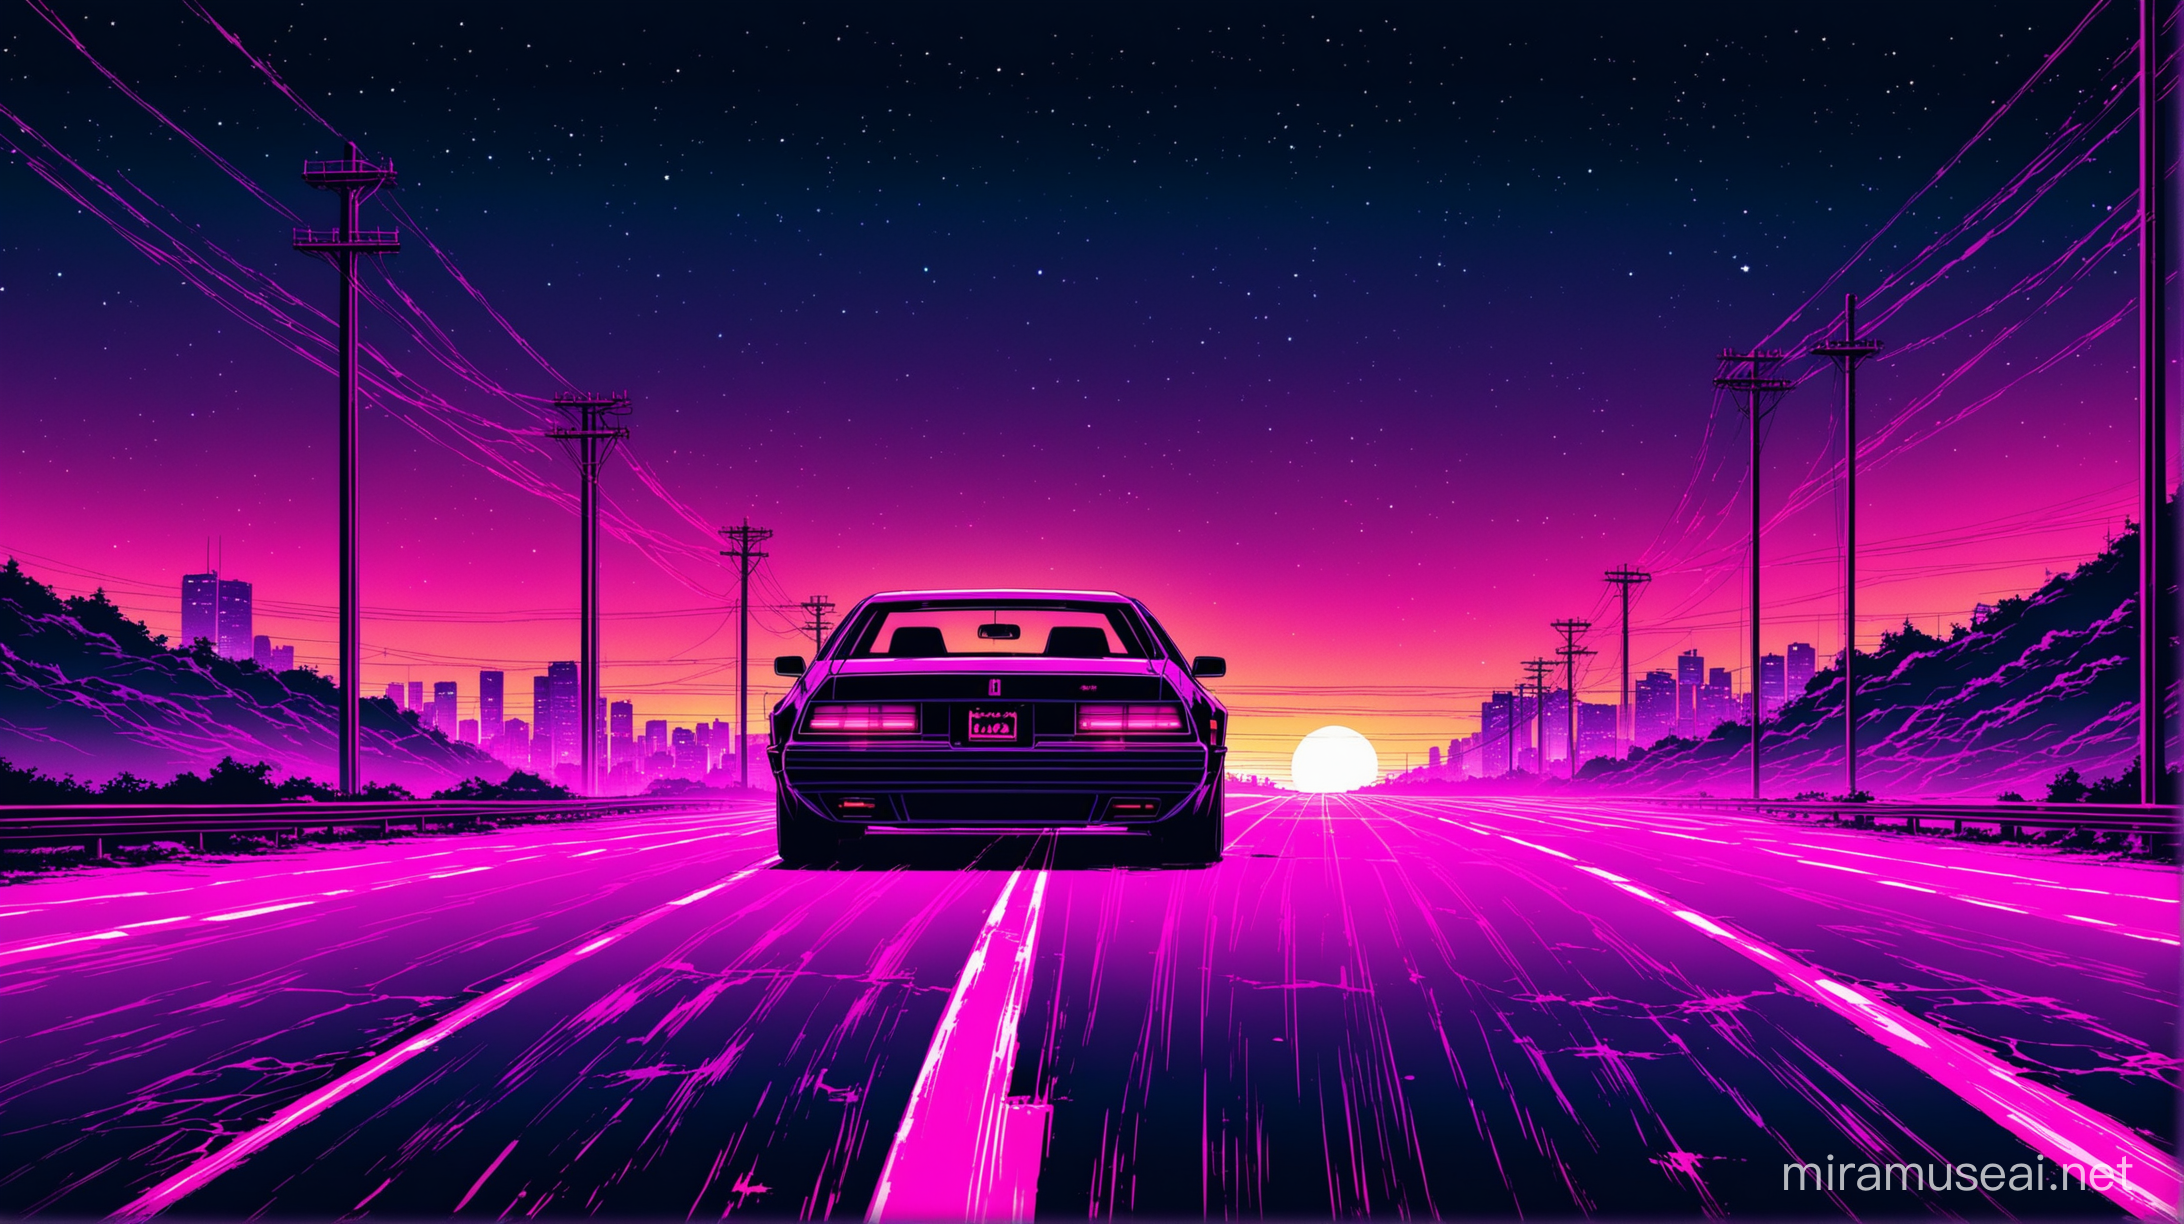 Synthwave Car Driving Through an Abandoned City at Night